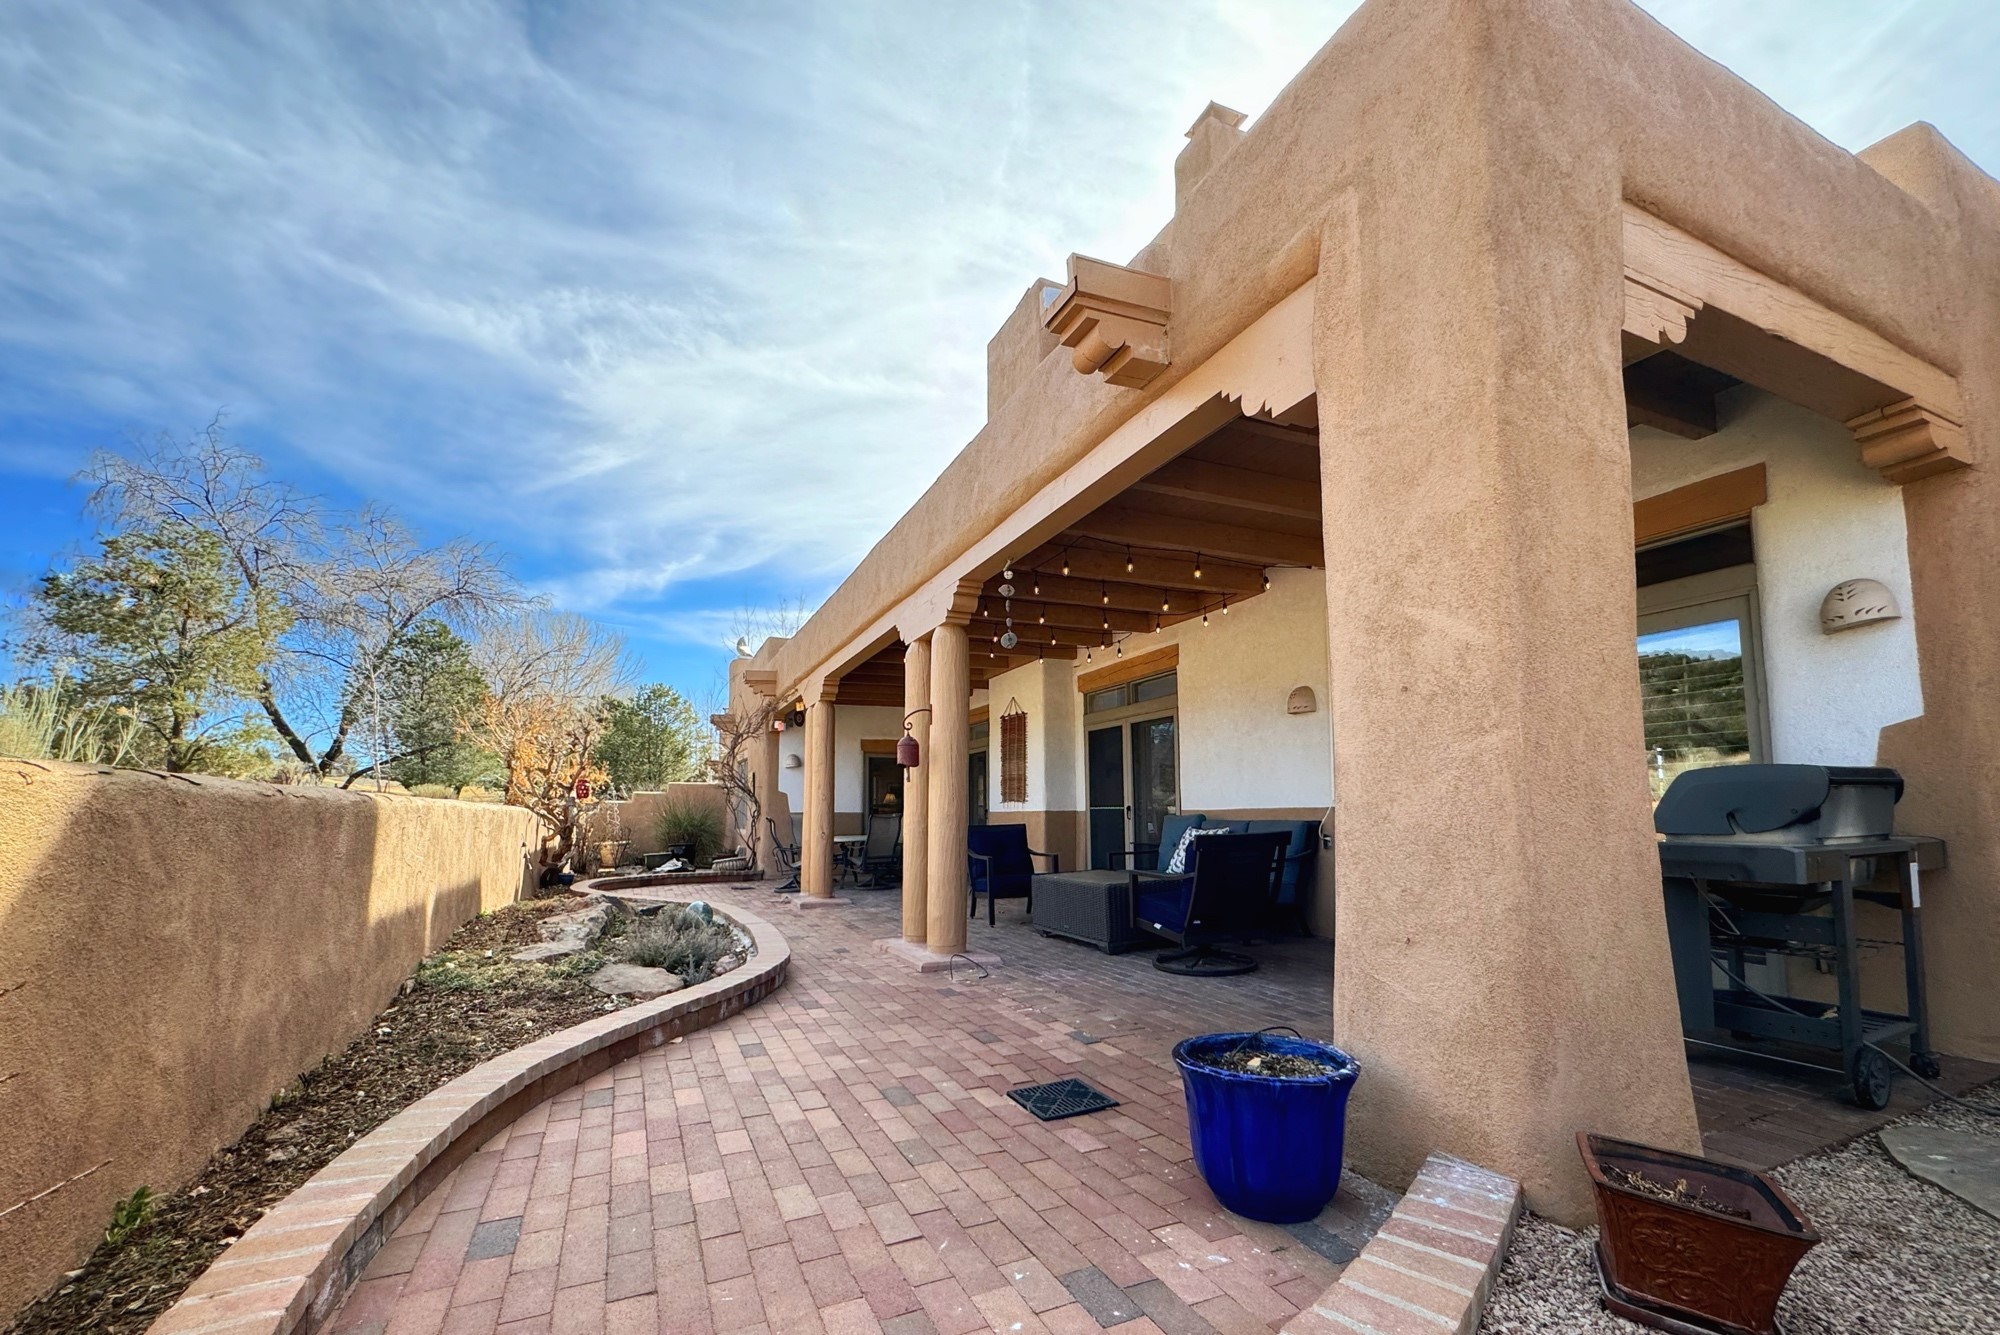 3101 Old Pecos Trail 626, Santa Fe, New Mexico 87505, 3 Bedrooms Bedrooms, ,4 BathroomsBathrooms,Residential,For Sale,3101 Old Pecos Trail 626,202400502